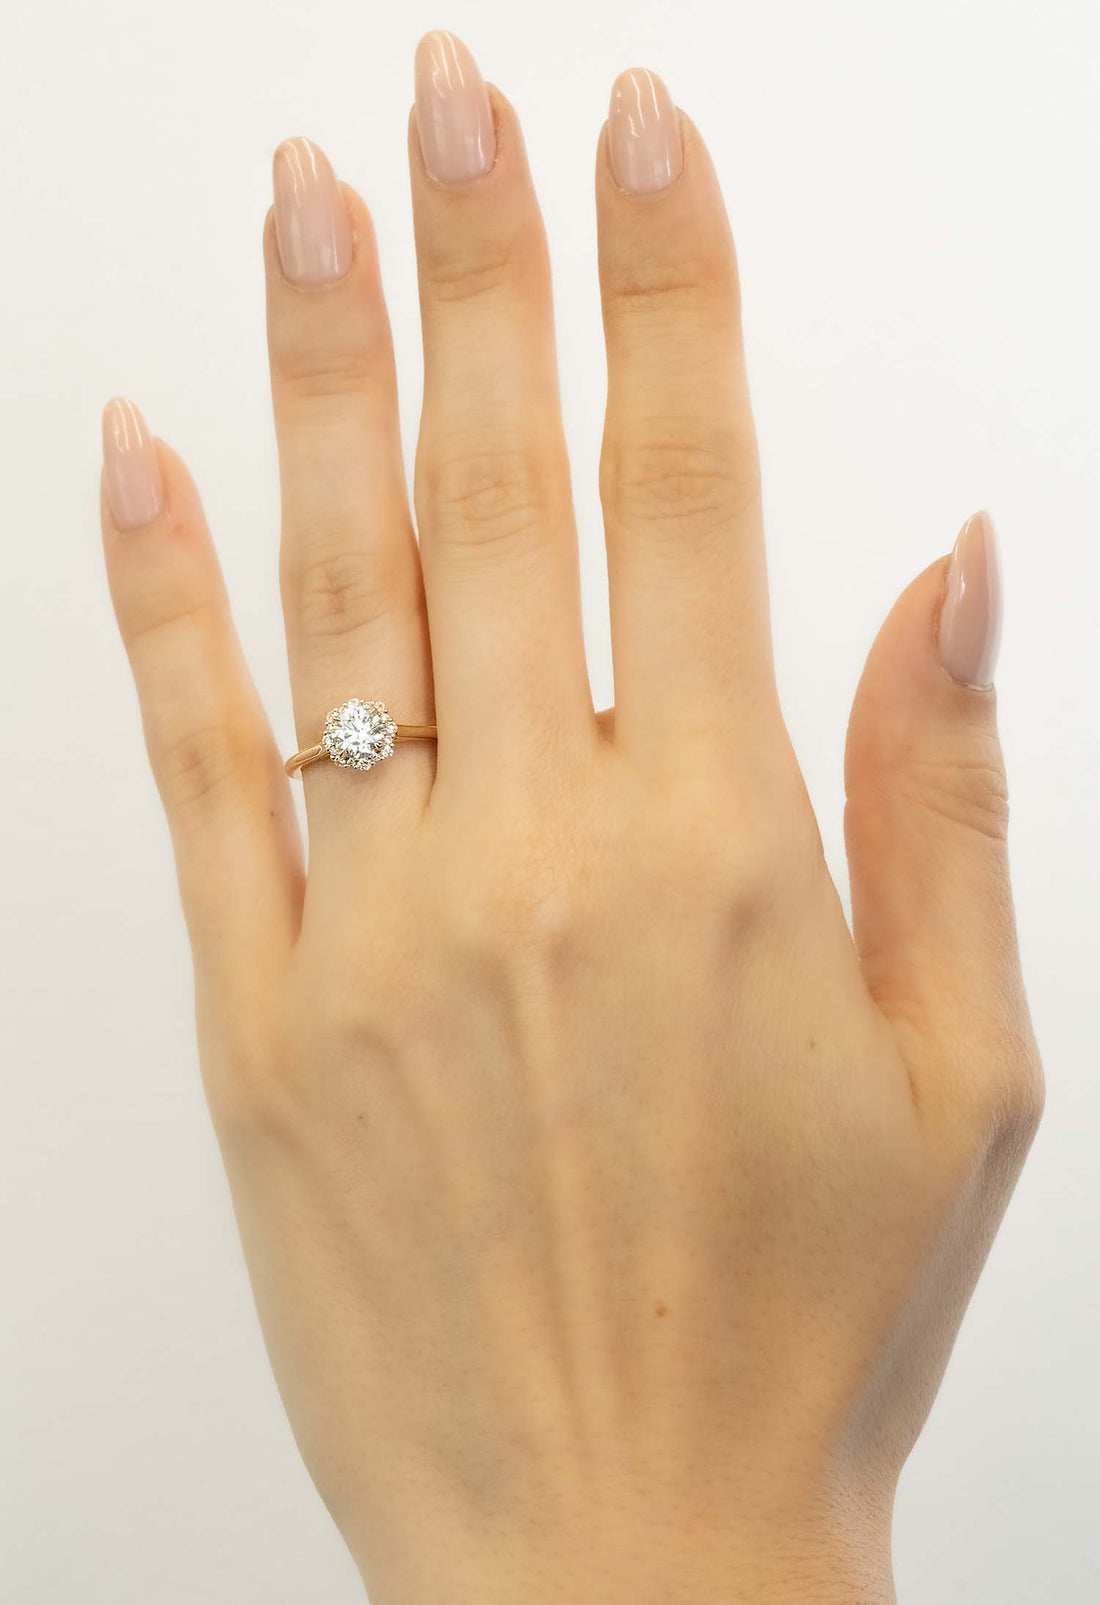 Days Jewelers Designers - The De Beers Forevermark Exceptional Diamond  Collection